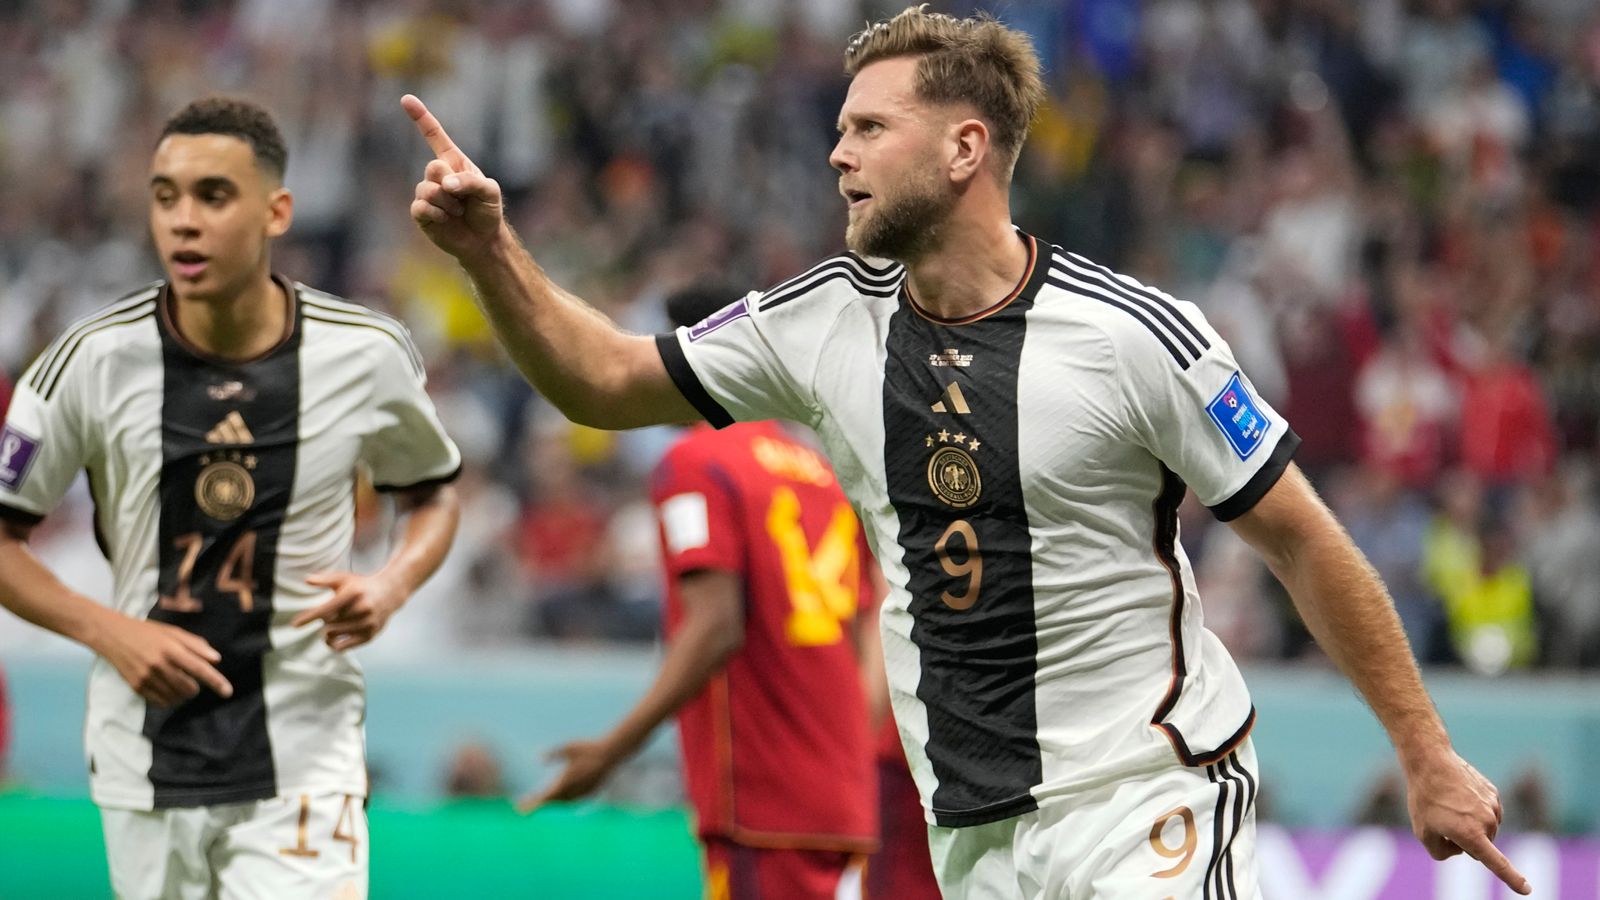 Germany ease past Peru in friendly after Fullkrug nets twice